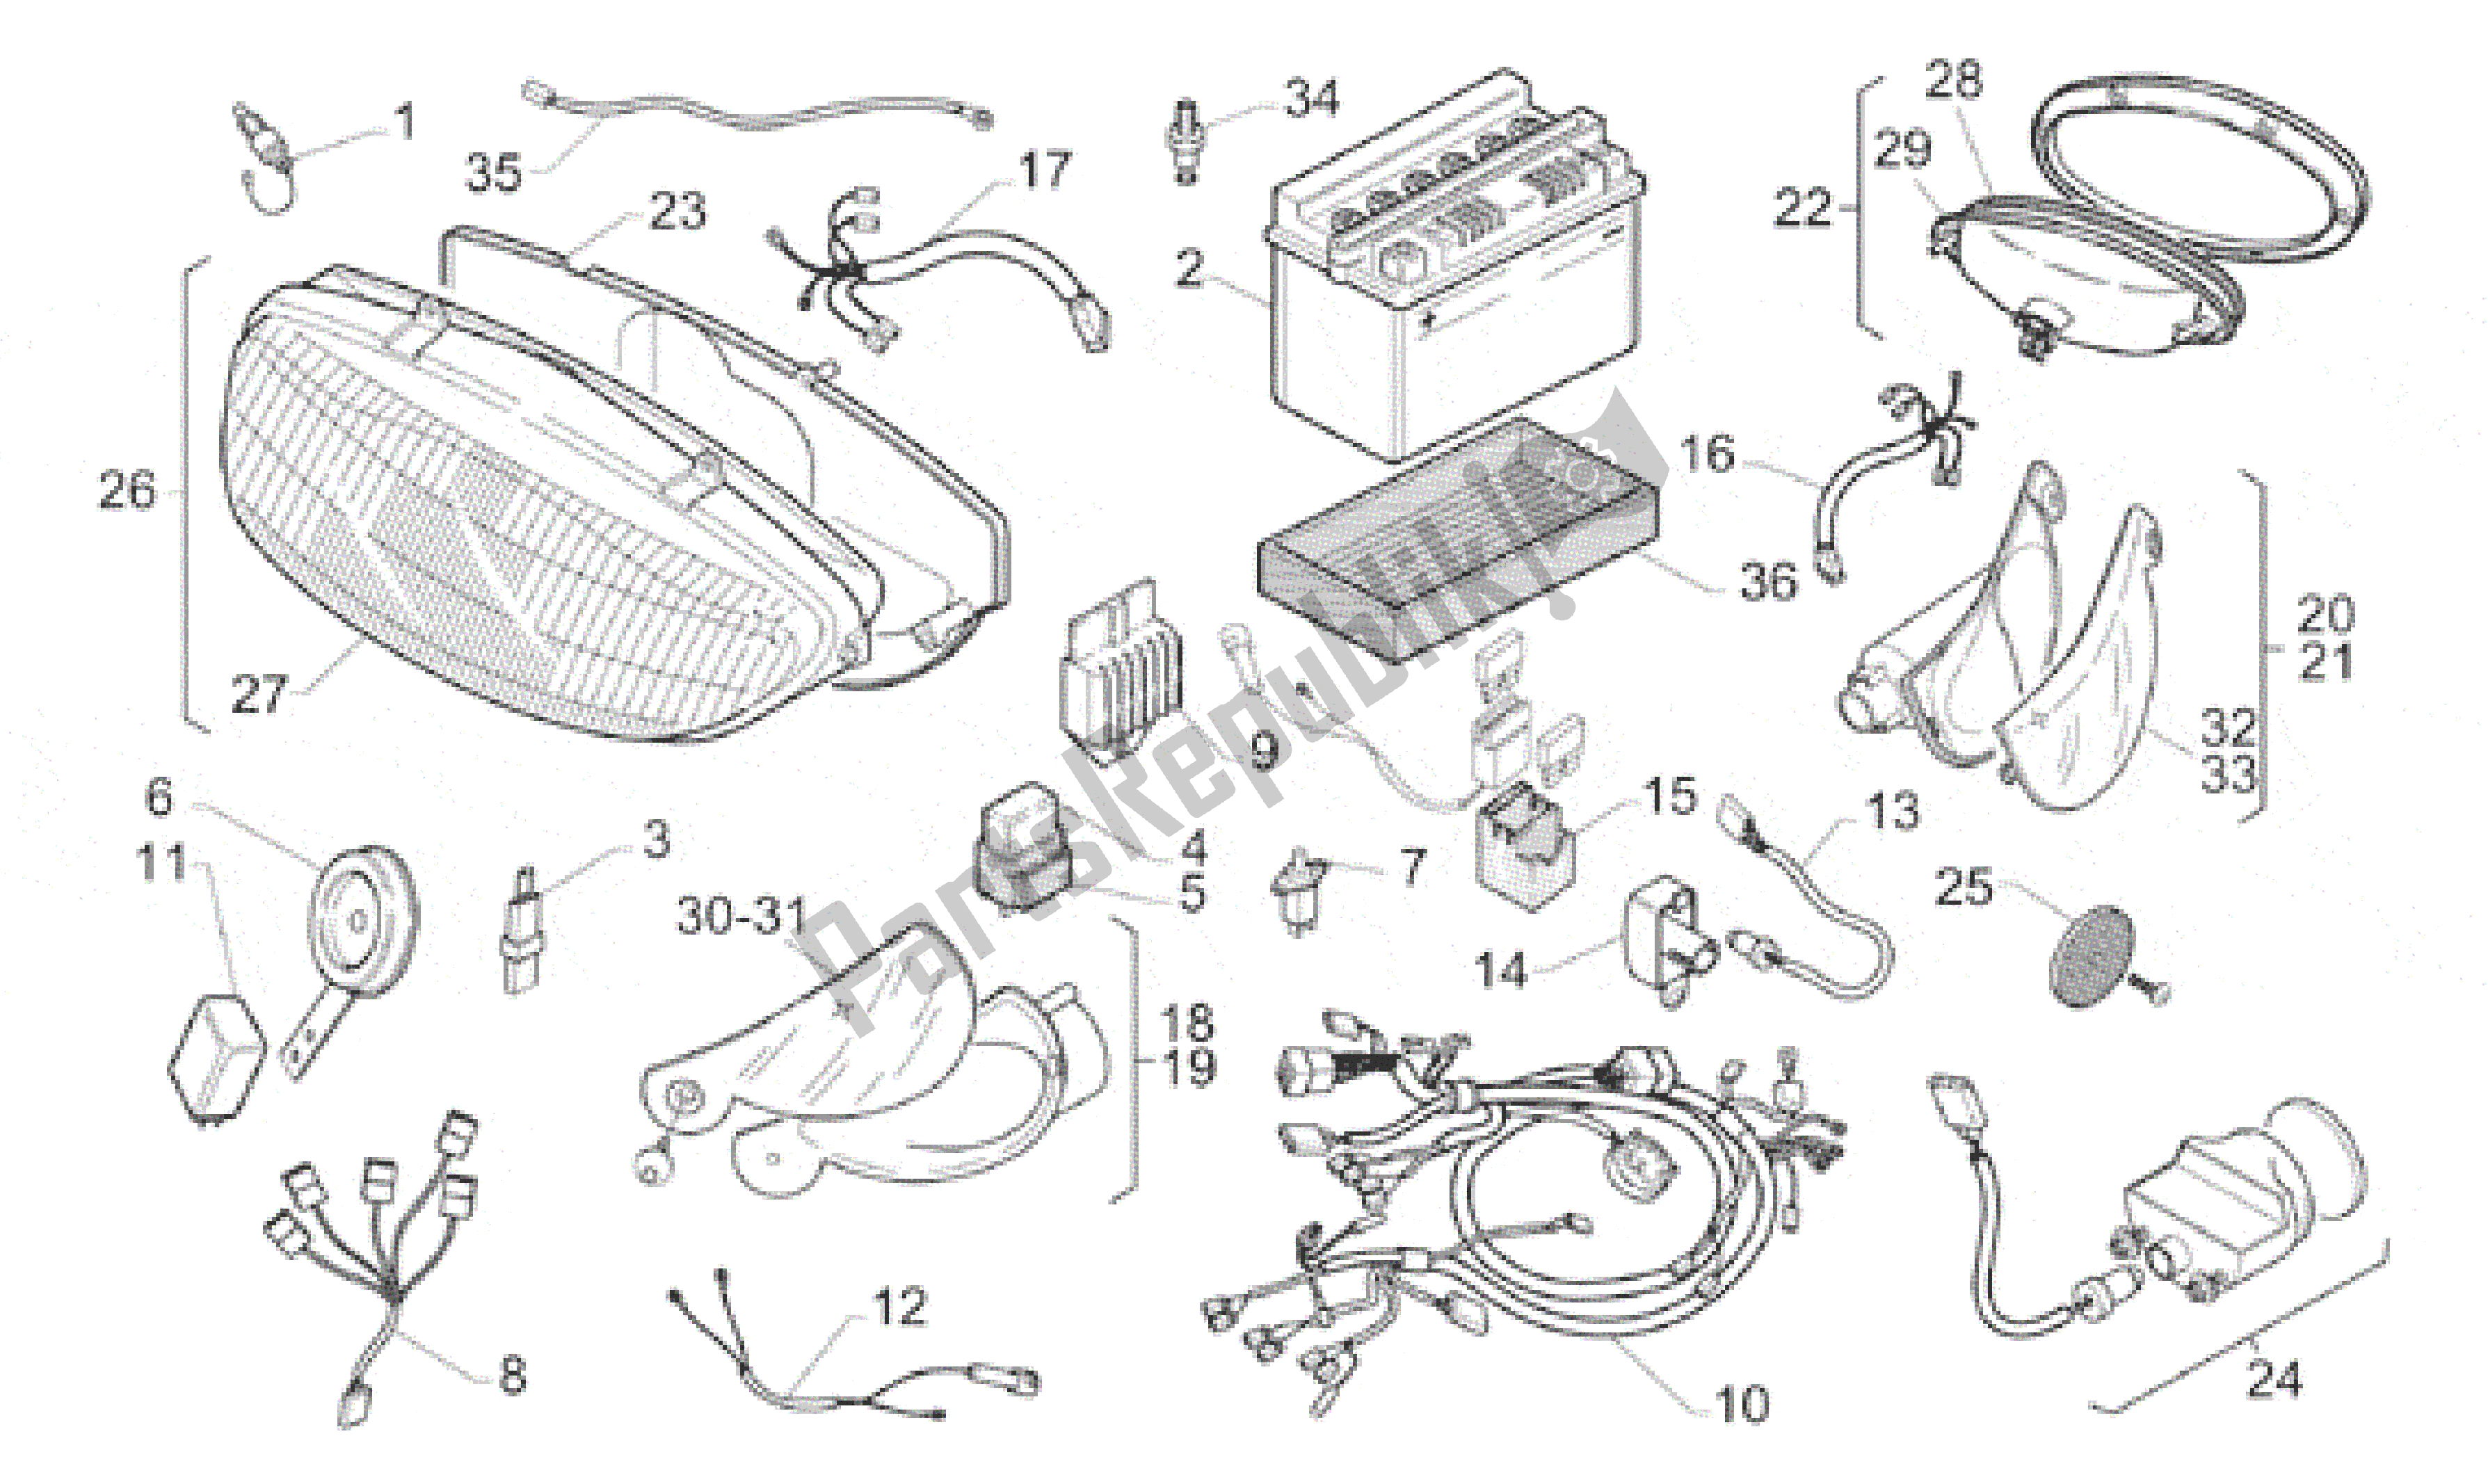 All parts for the Electrical System of the Aprilia Gulliver 50 1996 - 1998